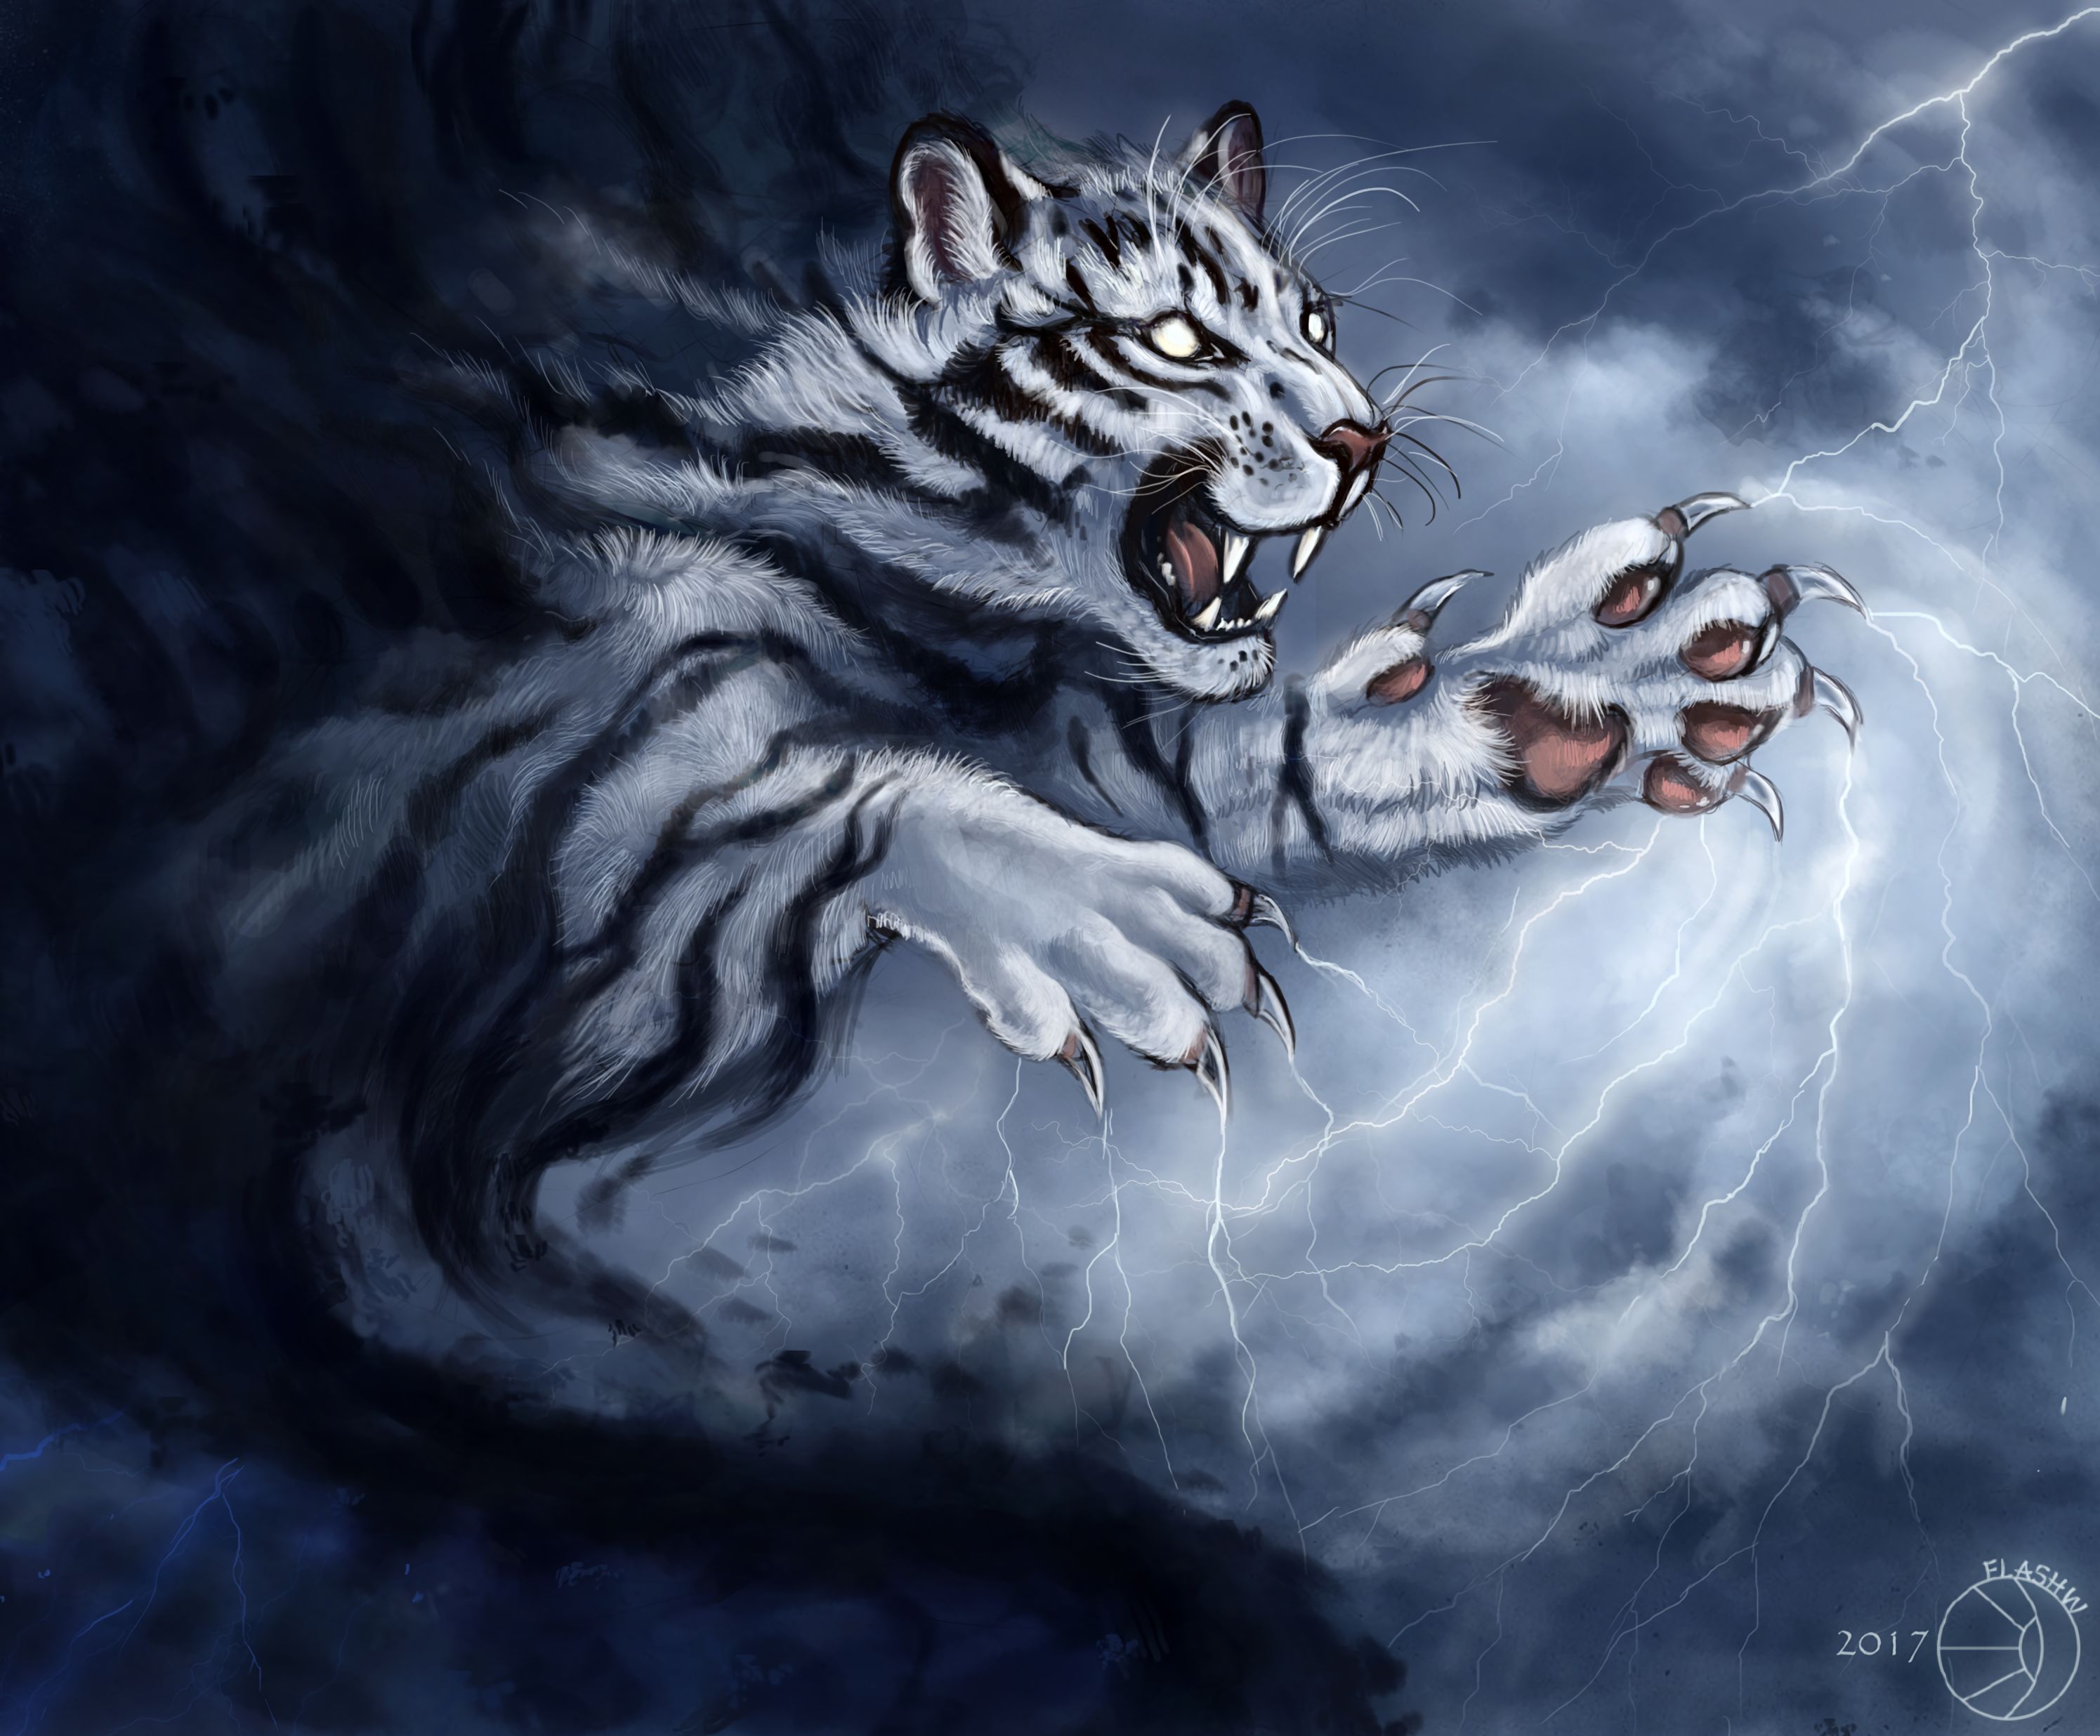 Cool Backgrounds claws, art, grin, predator Tiger